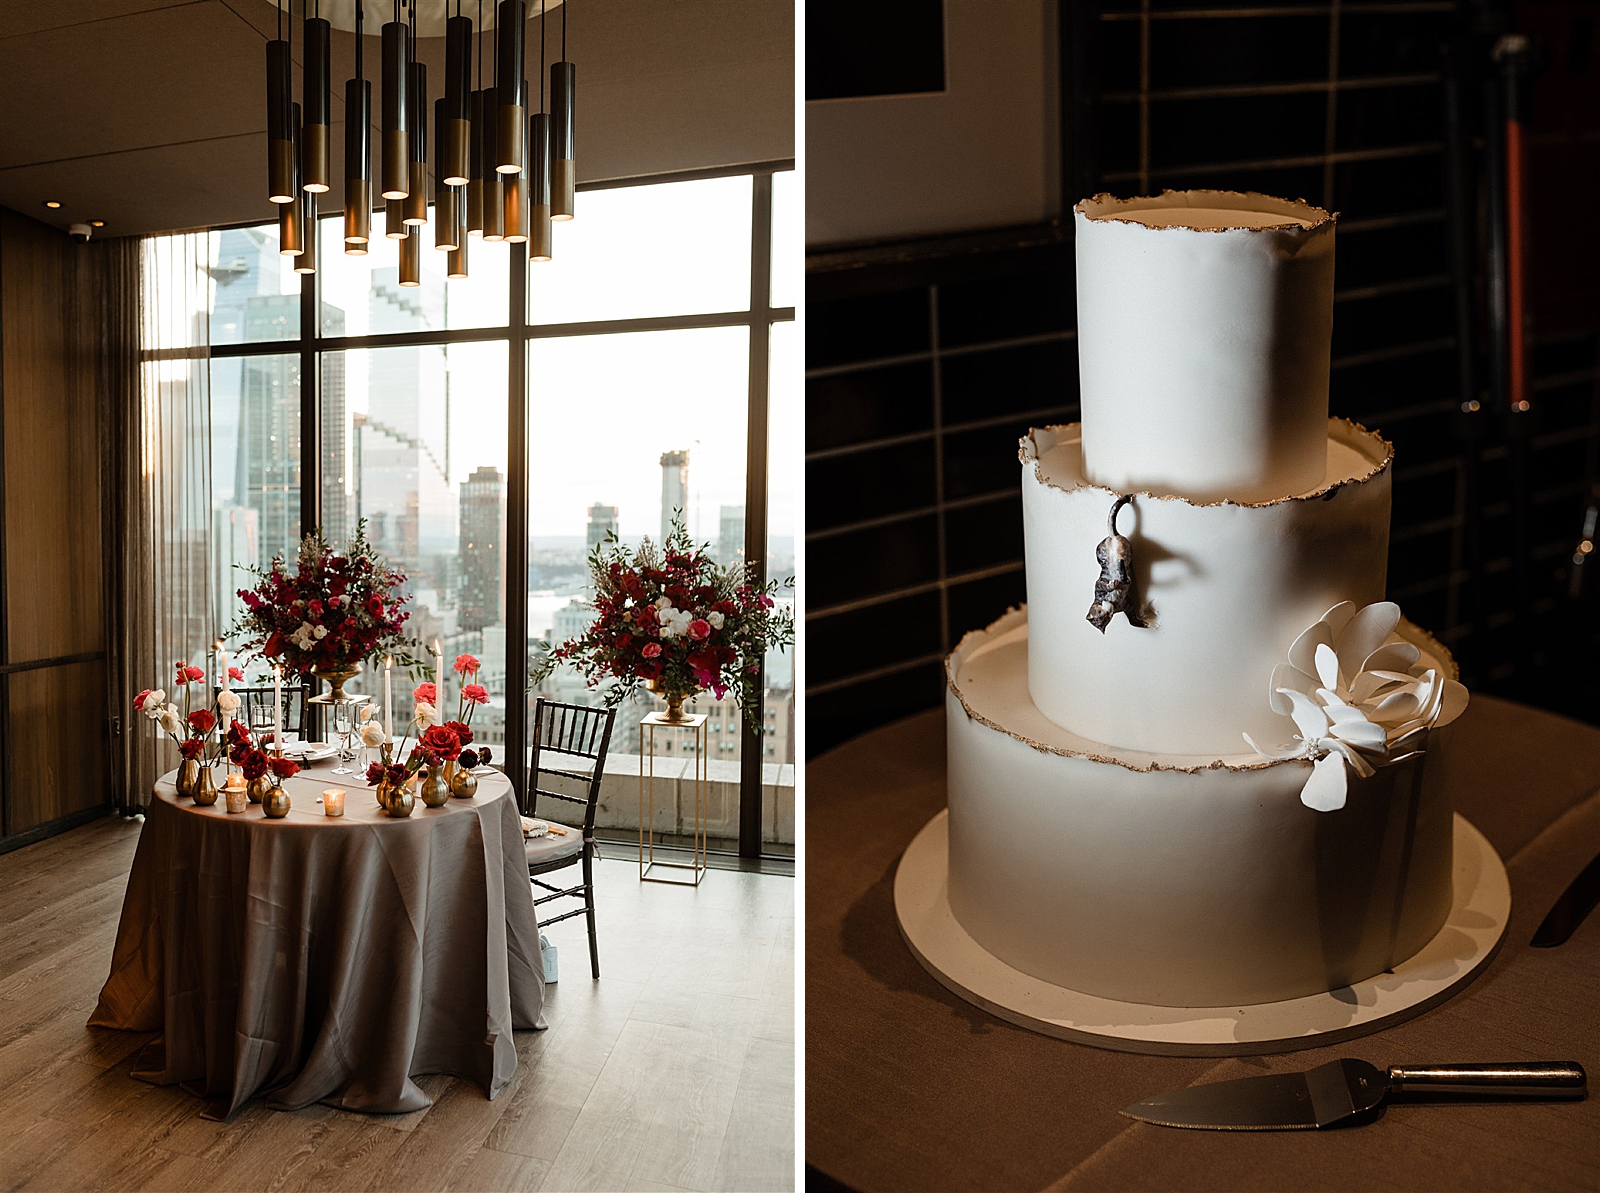 Left photo: Shot of the Bride and Groom's sweetheart table. 
Right photo: Shot of the three-tiered wedding cake. 